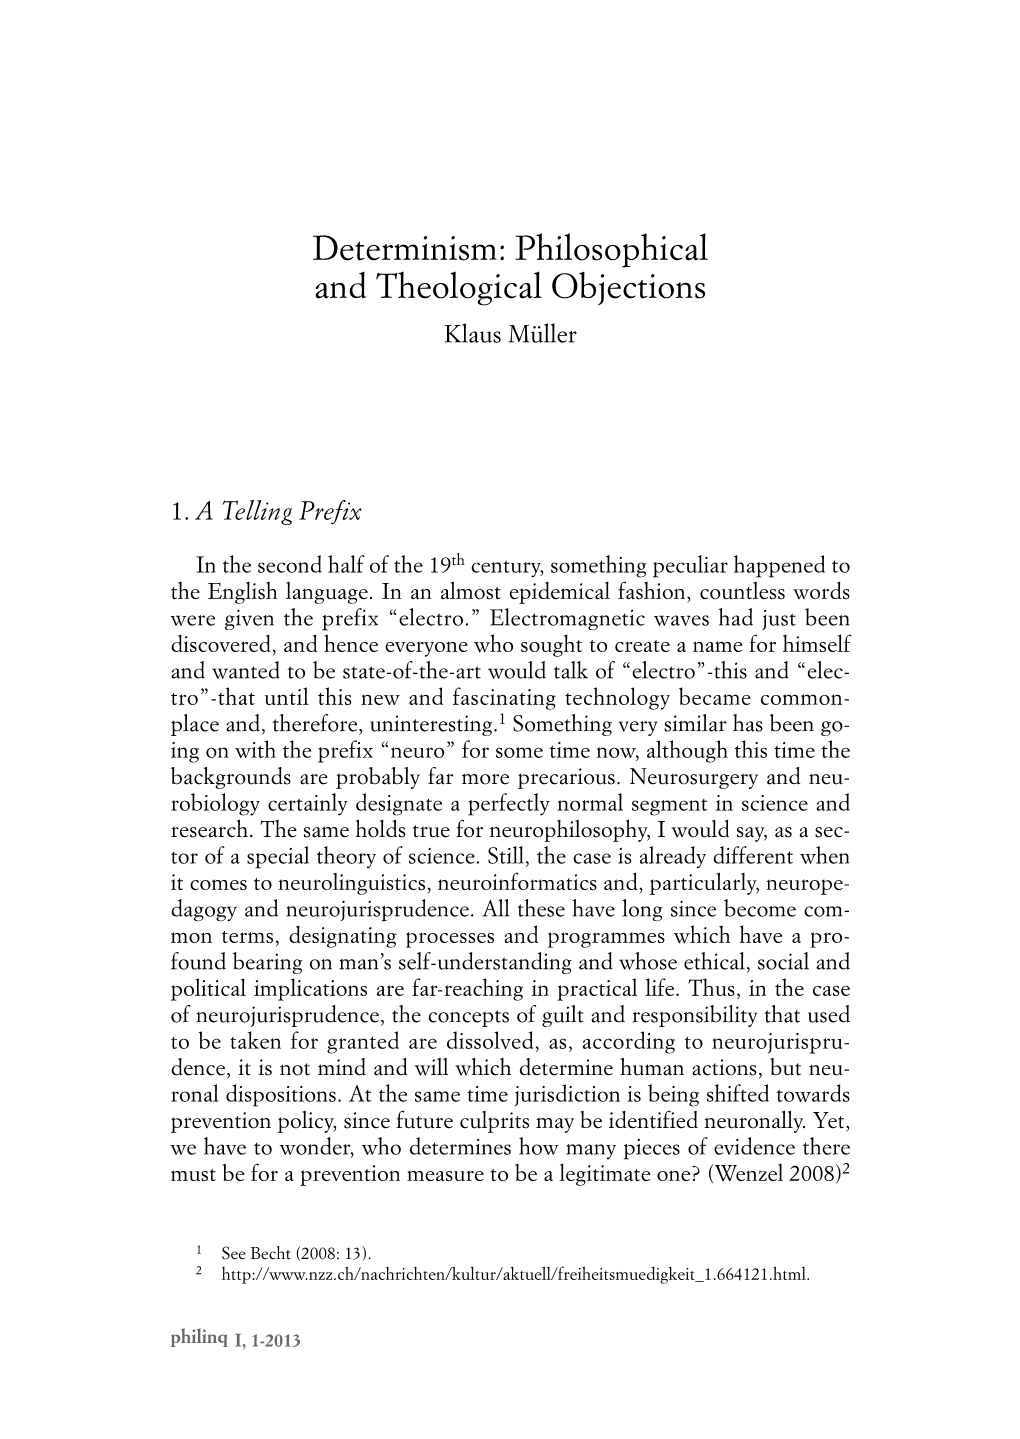 Determinism: Philosophical and Theological Objections Klaus Müller